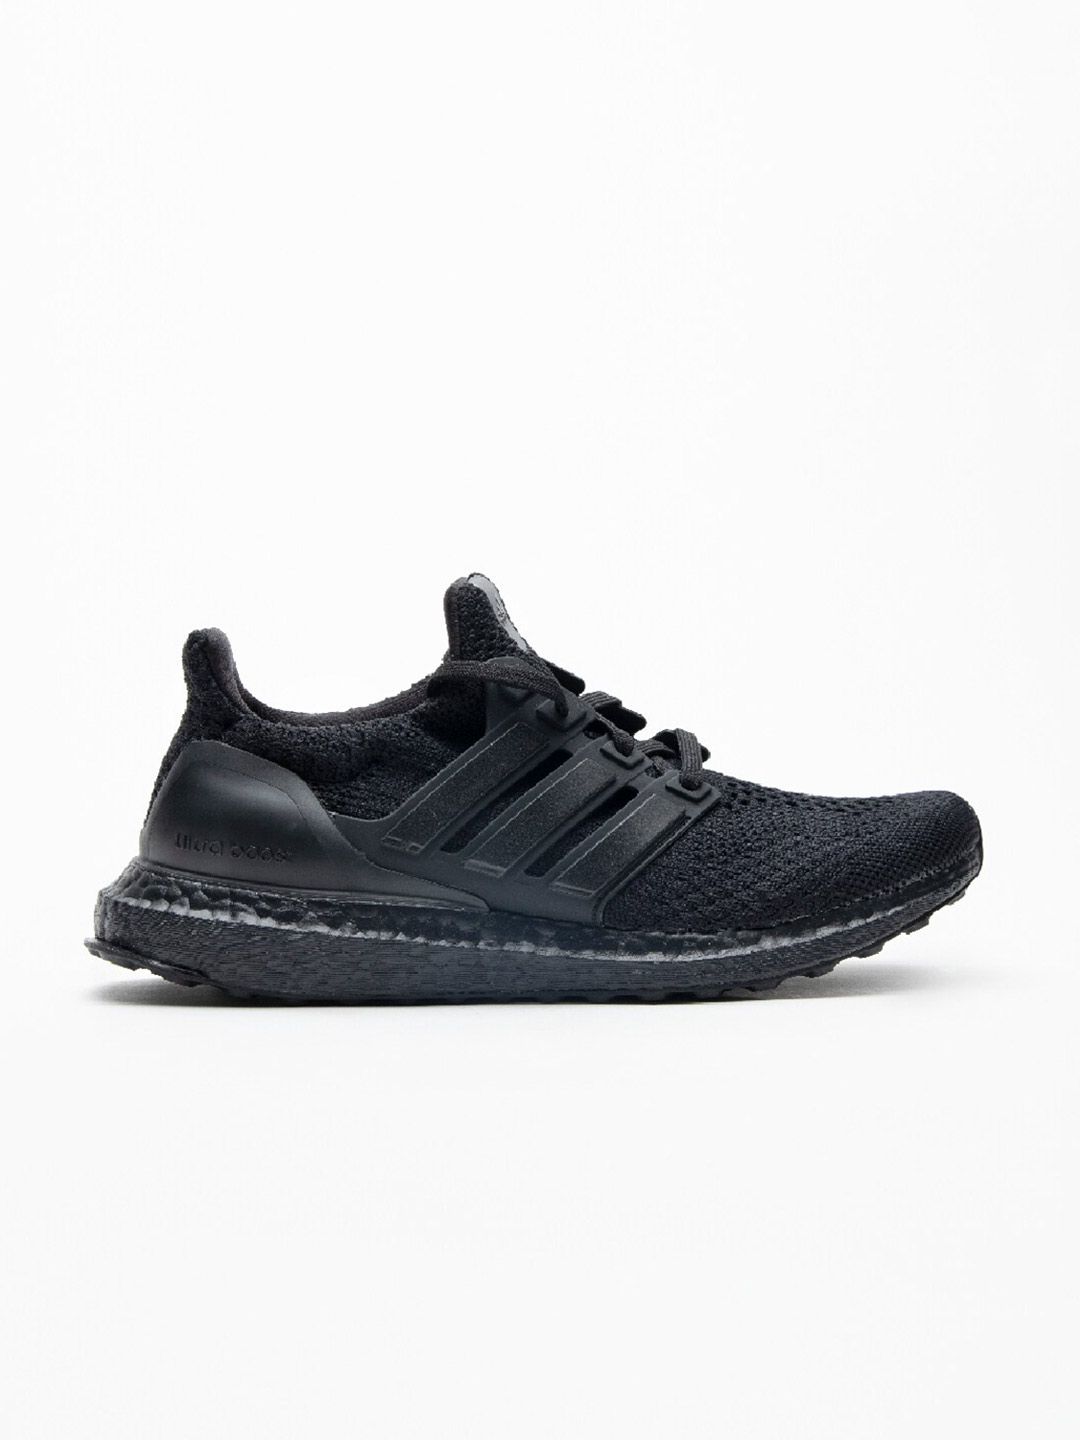 ADIDAS Women Black Sports Shoes Price in India